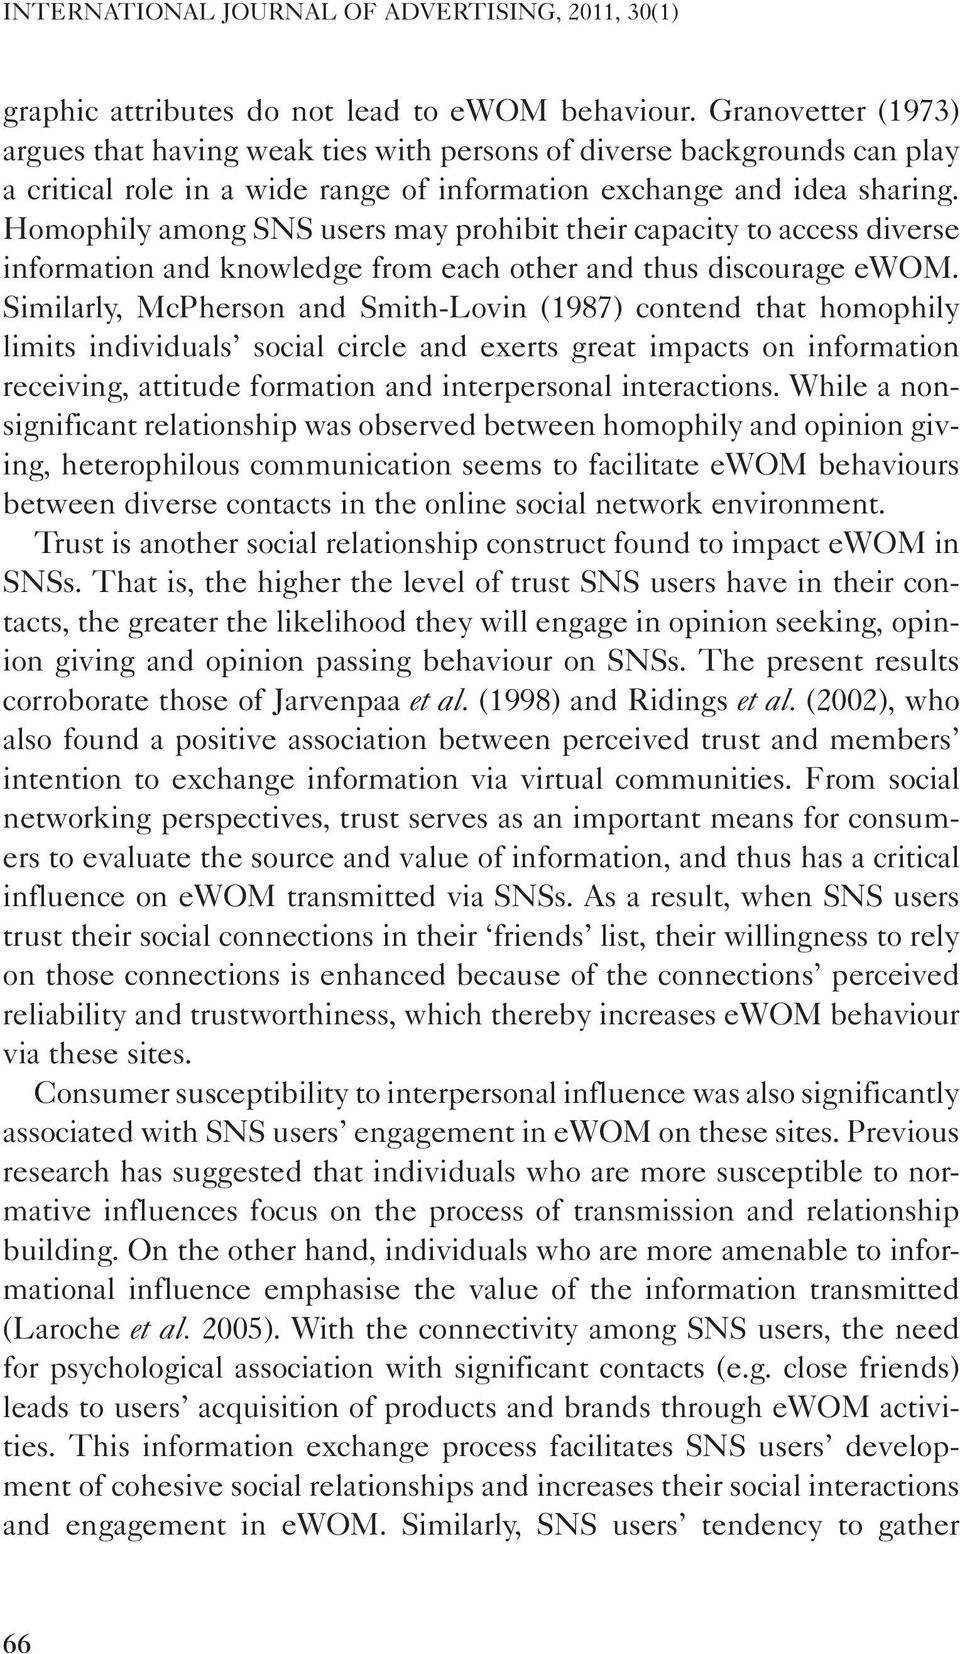 Homophily among SNS users may prohibit their capacity to access diverse information and knowledge from each other and thus discourage ewom.